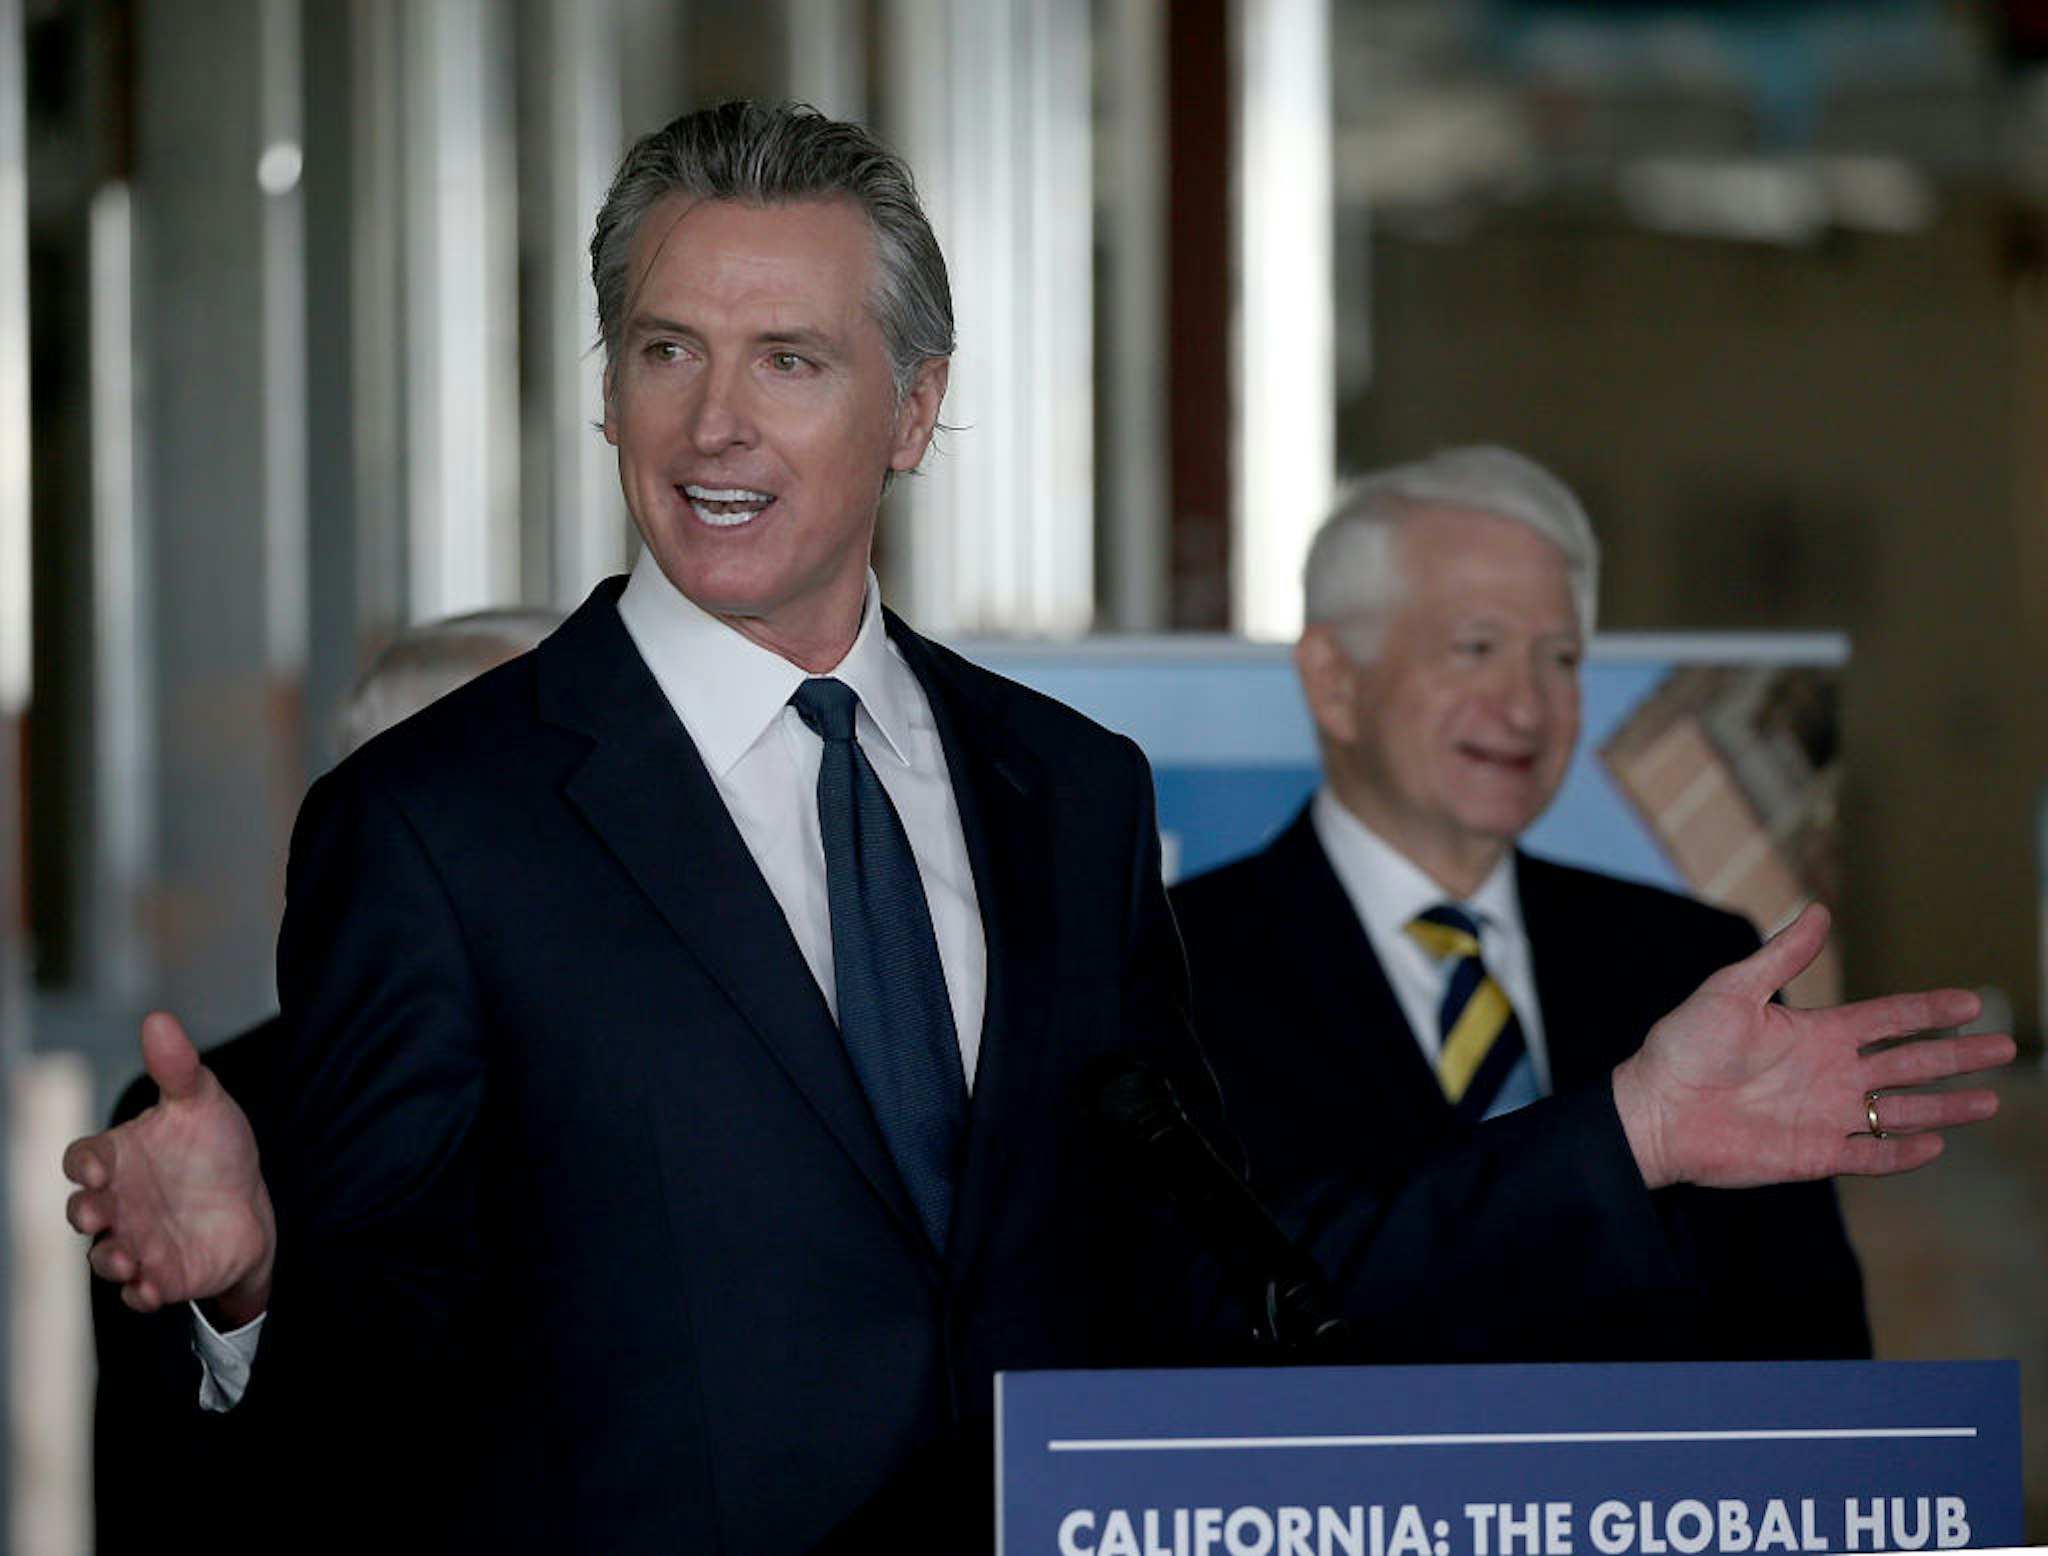 Los Angeles, CA - California Governor Gavin Newsom,speaks to University of California and elected officials on a tour of the former Westside Pavilion shopping center in Los Angeles on Wednesday, Jan. 3, 2024. The structure is being converted into a new science learning and research center connected to UCLA.